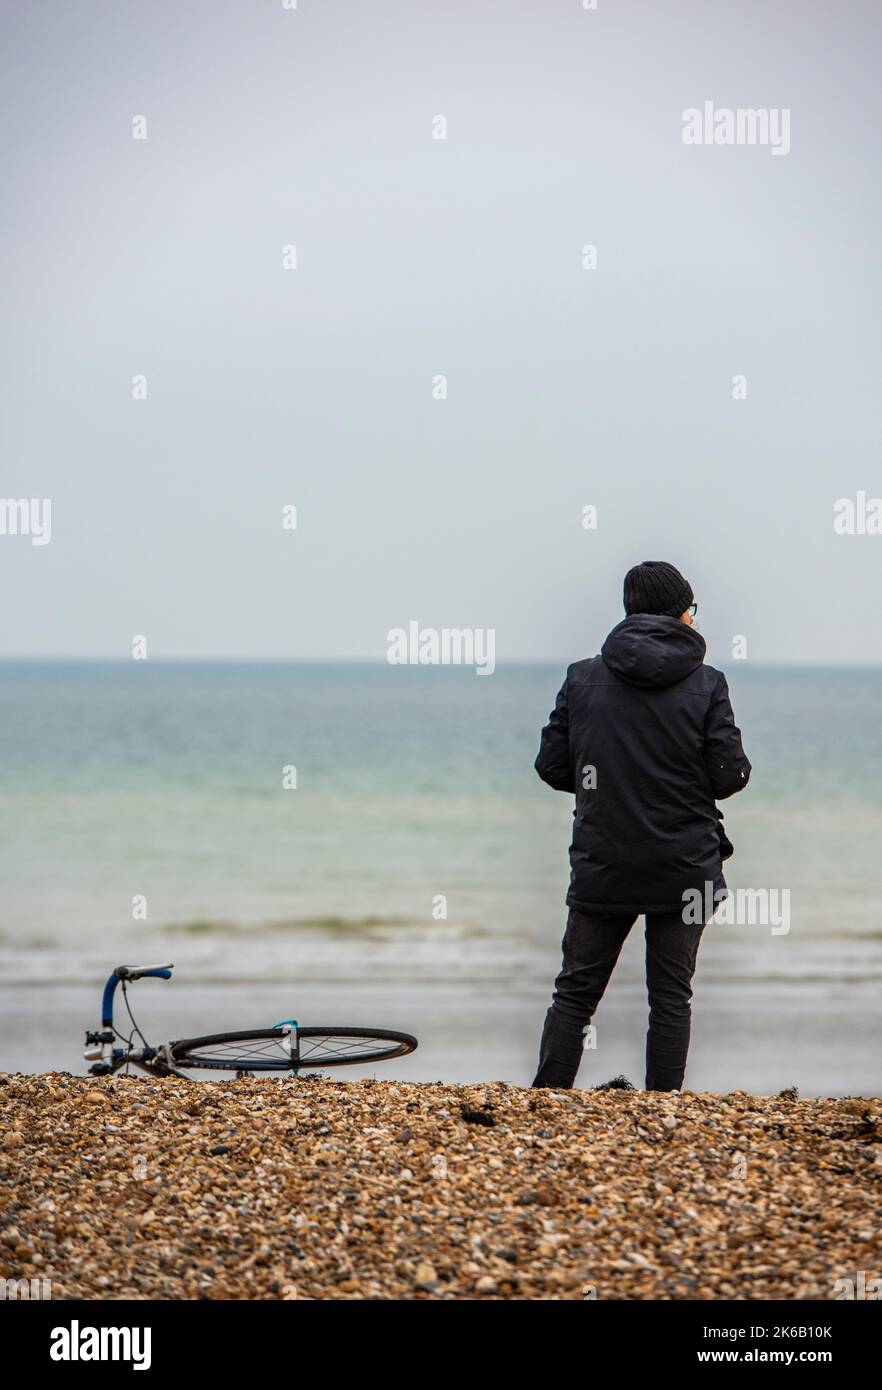 person standing alone on a beach next to a bicycle laying on the shingle looking out to sea daydreaming on a cold autumnal day. Stock Photo